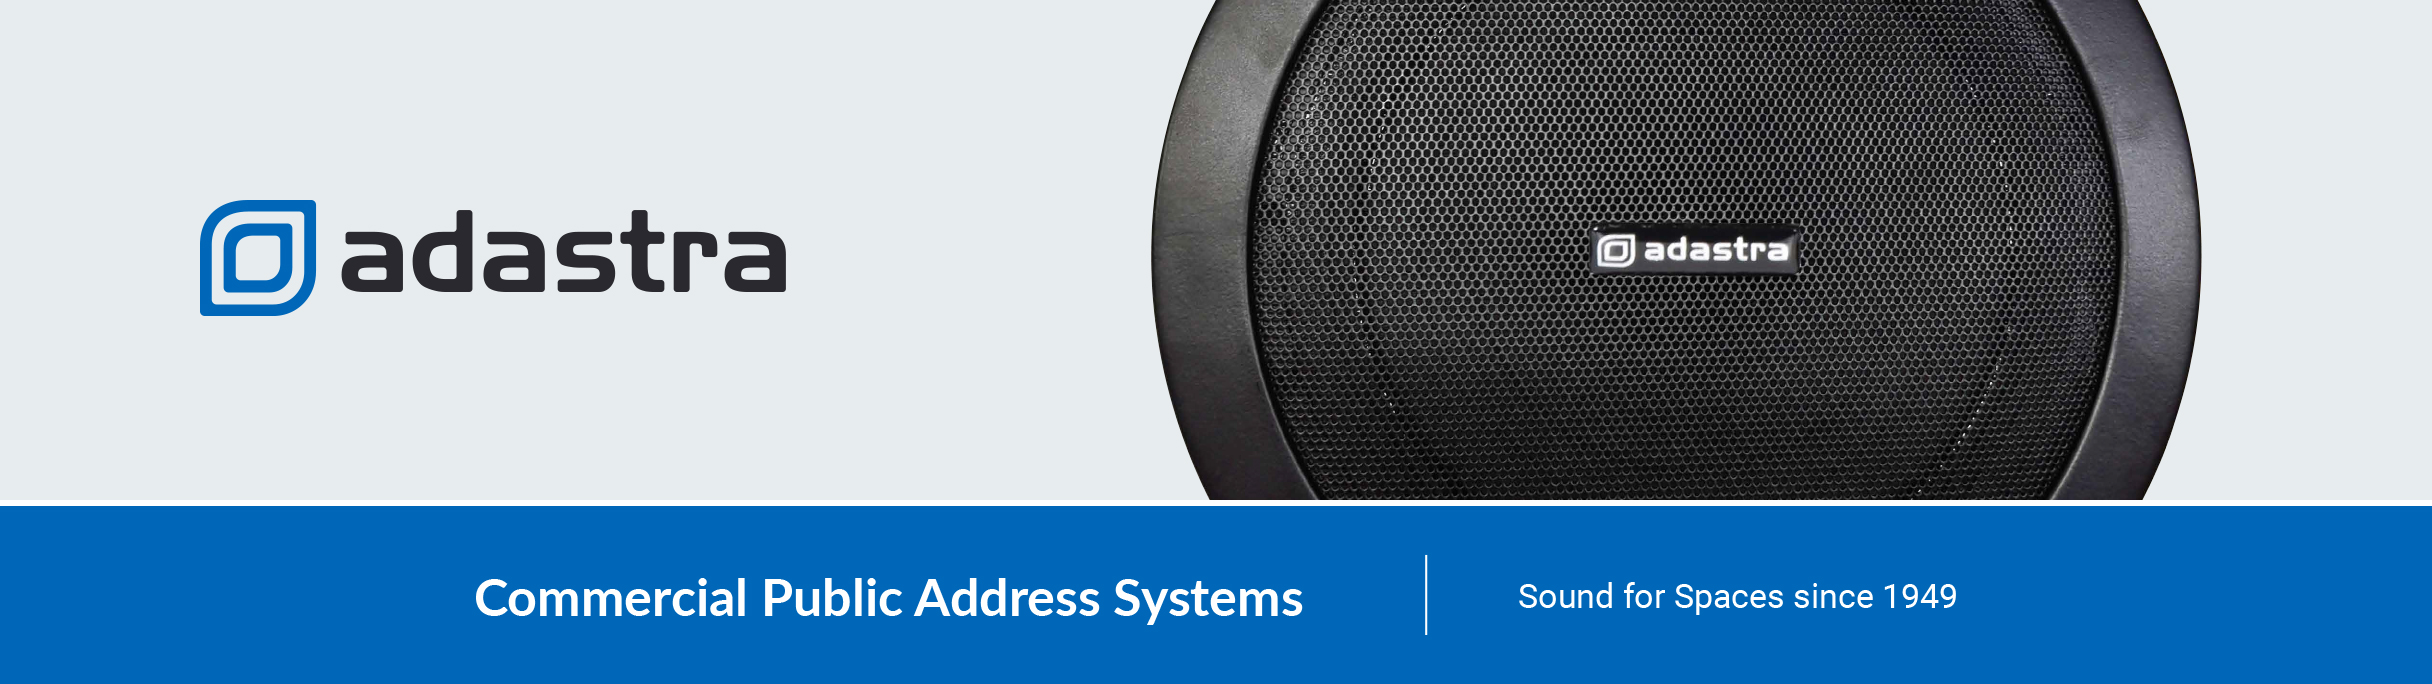 Adastra - Commercial Public Address Systems - Sound for Spaces since 1949